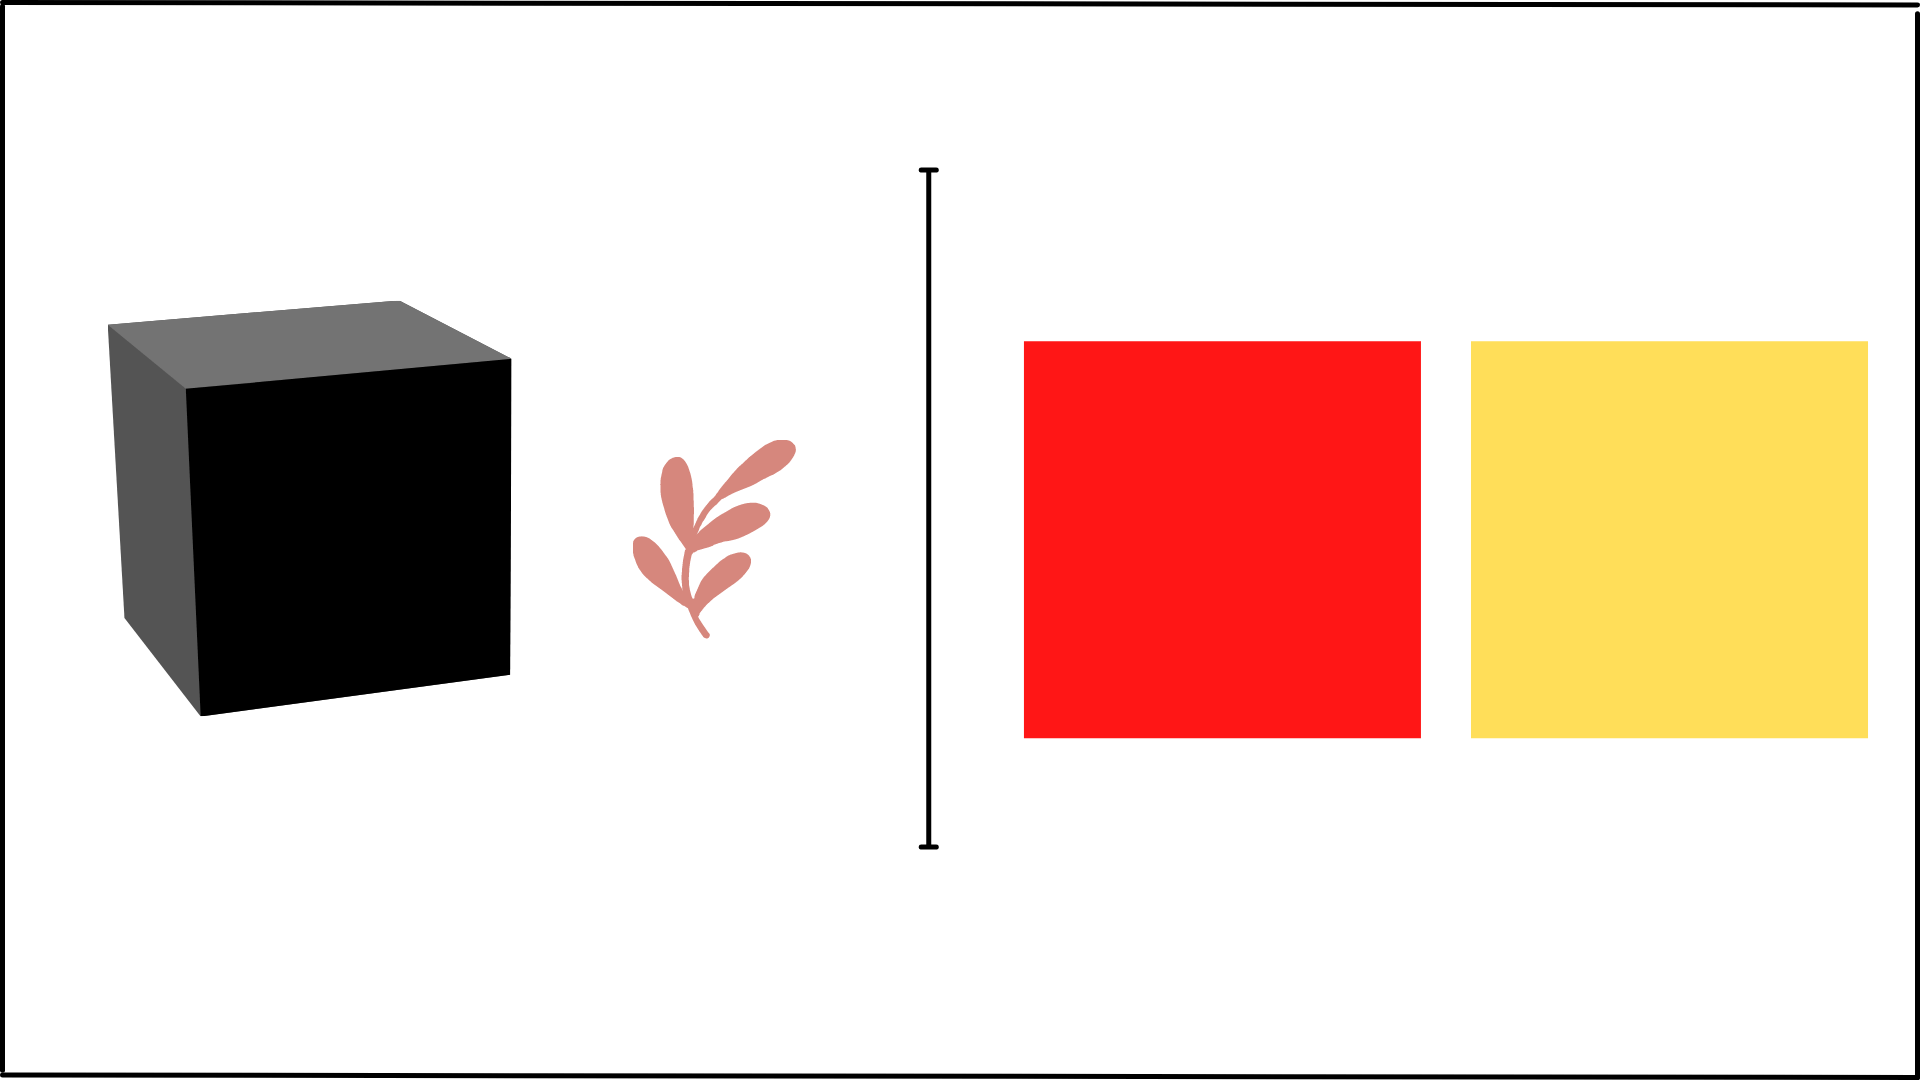 visual-weight-difference-in-size-three-dimensional-colour-red-most-visual-weight-yellow-least-visual-weight